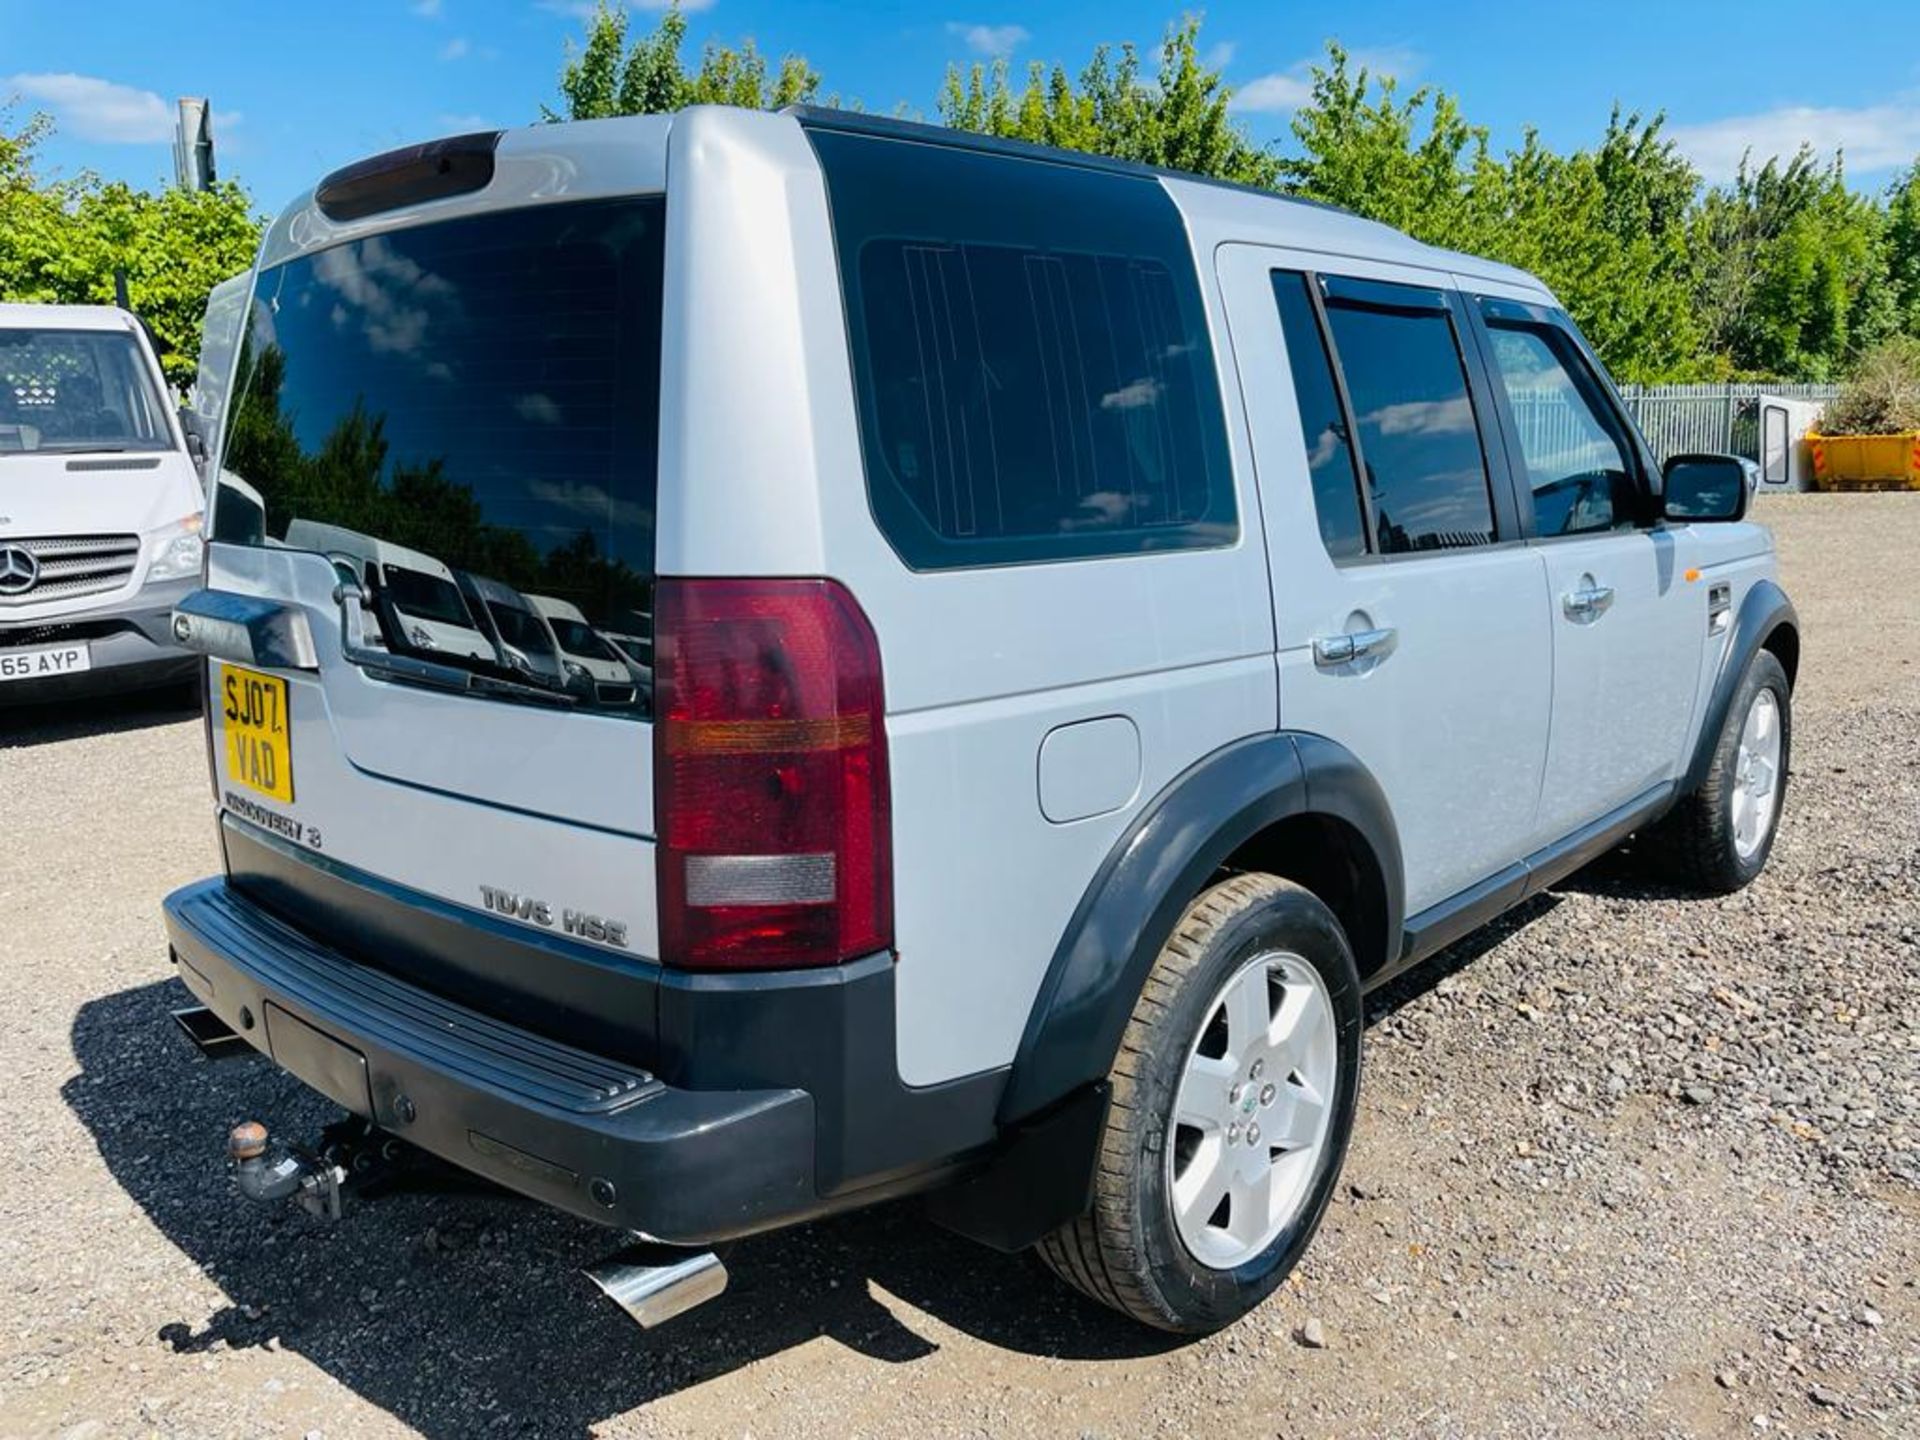 ** ON SALE ** Land Rover Discovery 3 TDV6 HSE Auto 190 2007 '07 Reg' 7 seater - Sat Nav - A/C - Image 24 of 30